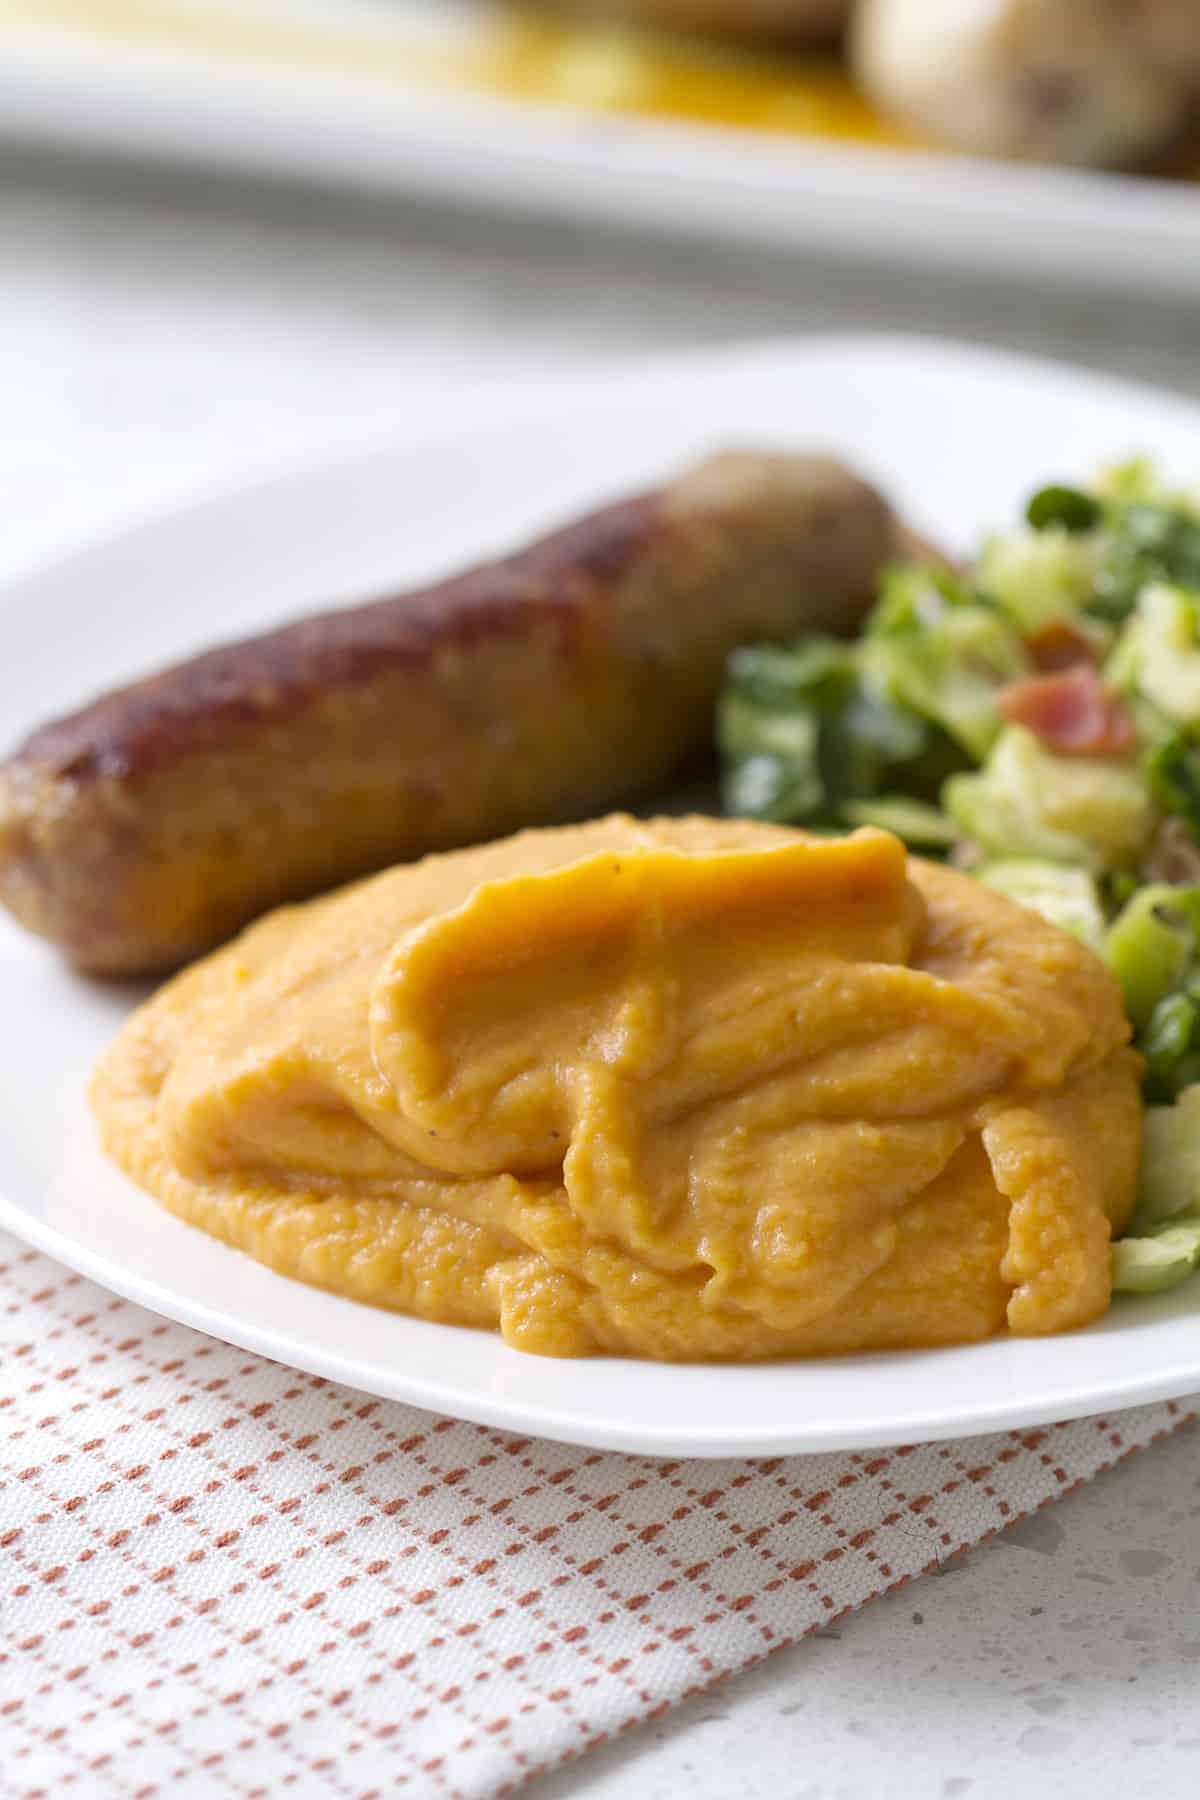 mashed sweet potatoes on plate with sausage and brussel sproouts